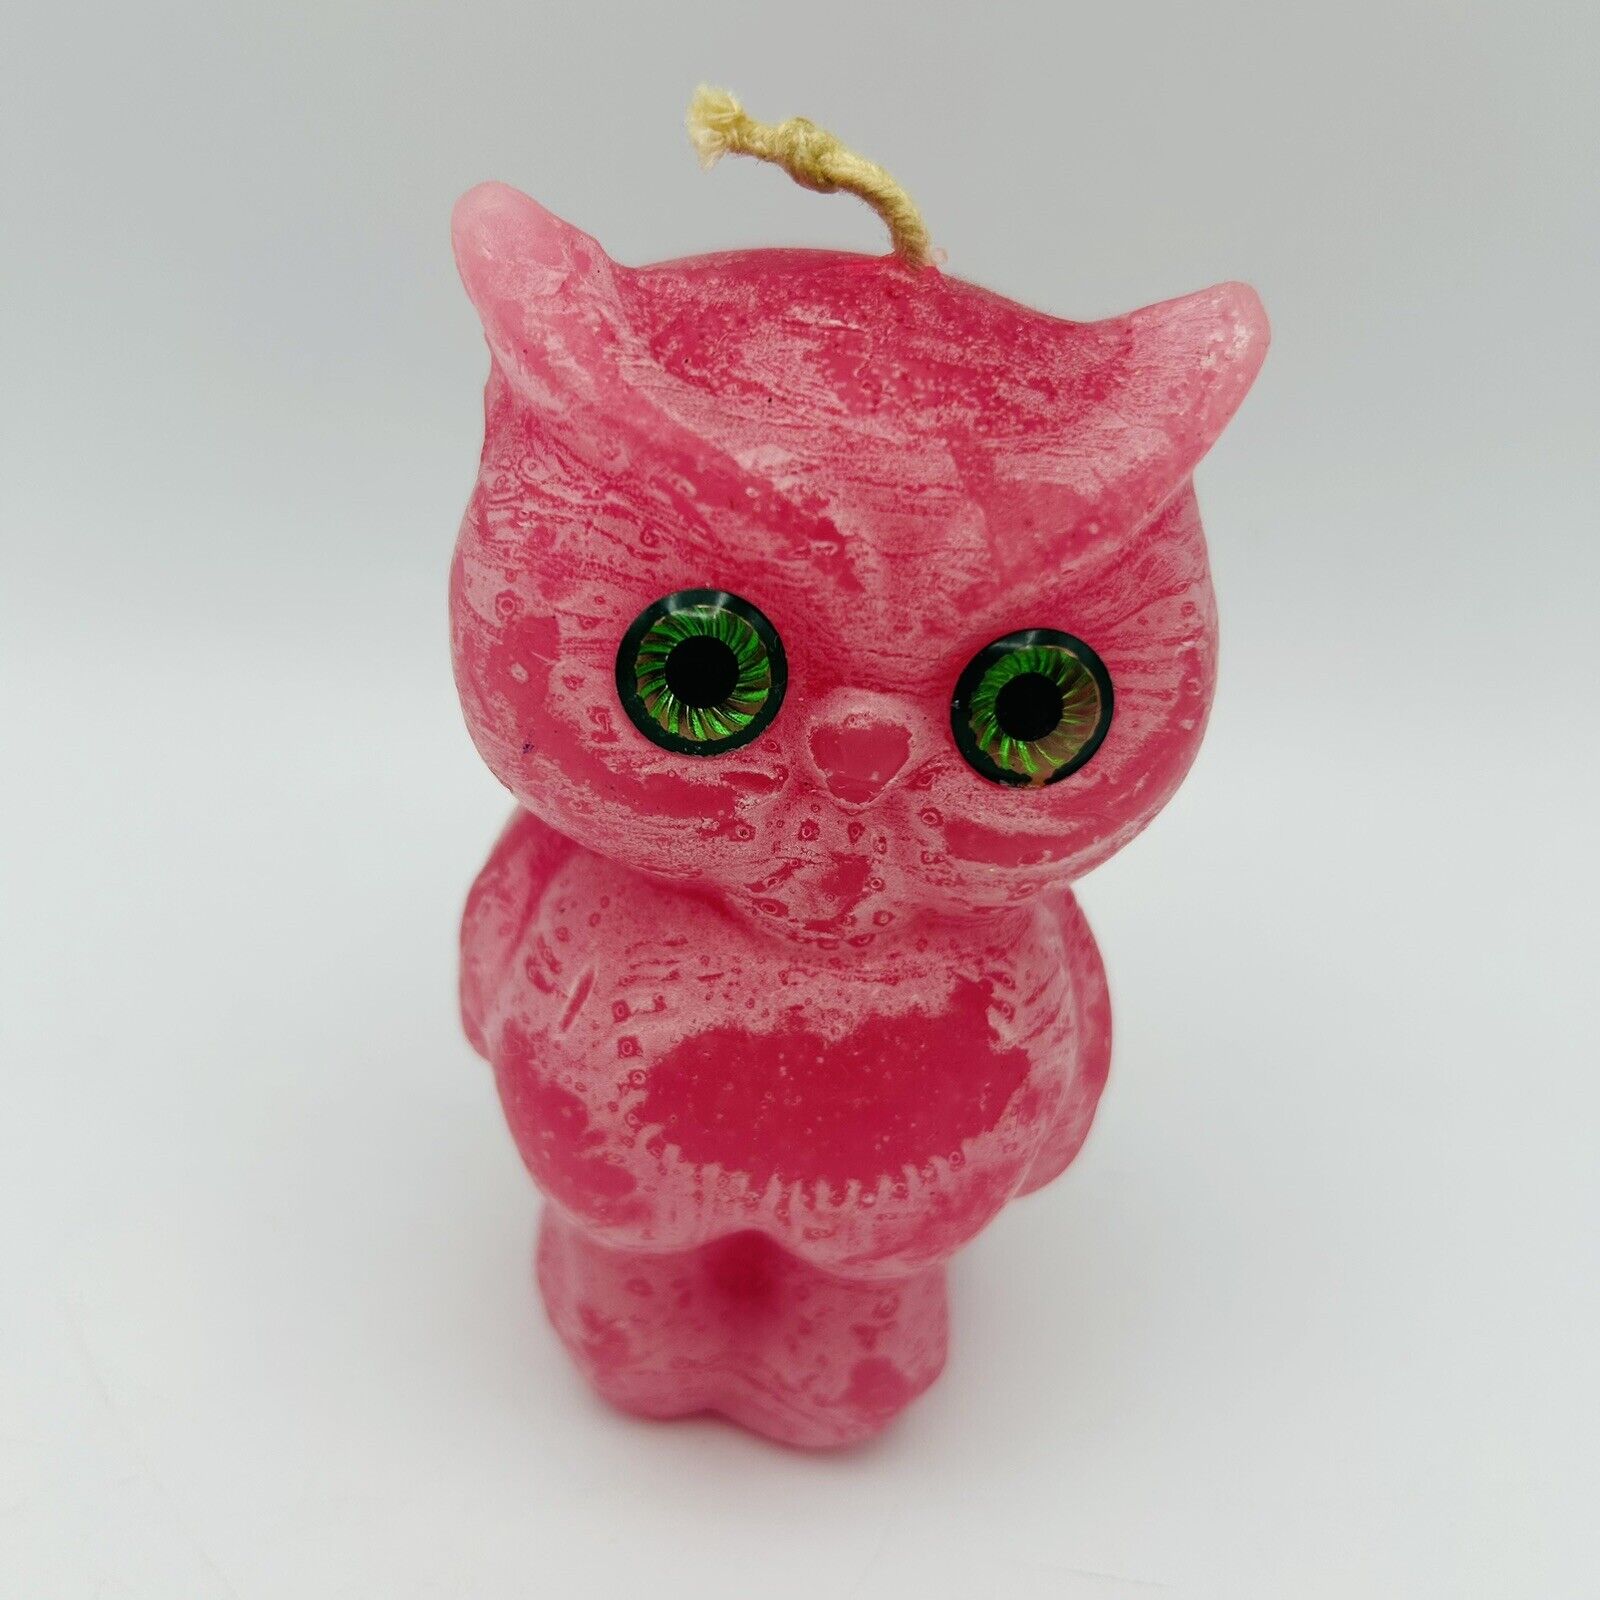 Vintage 70’s Green Eye Owl Wax Candle Kitsch Pink 4” Never Used Groovy Hippie